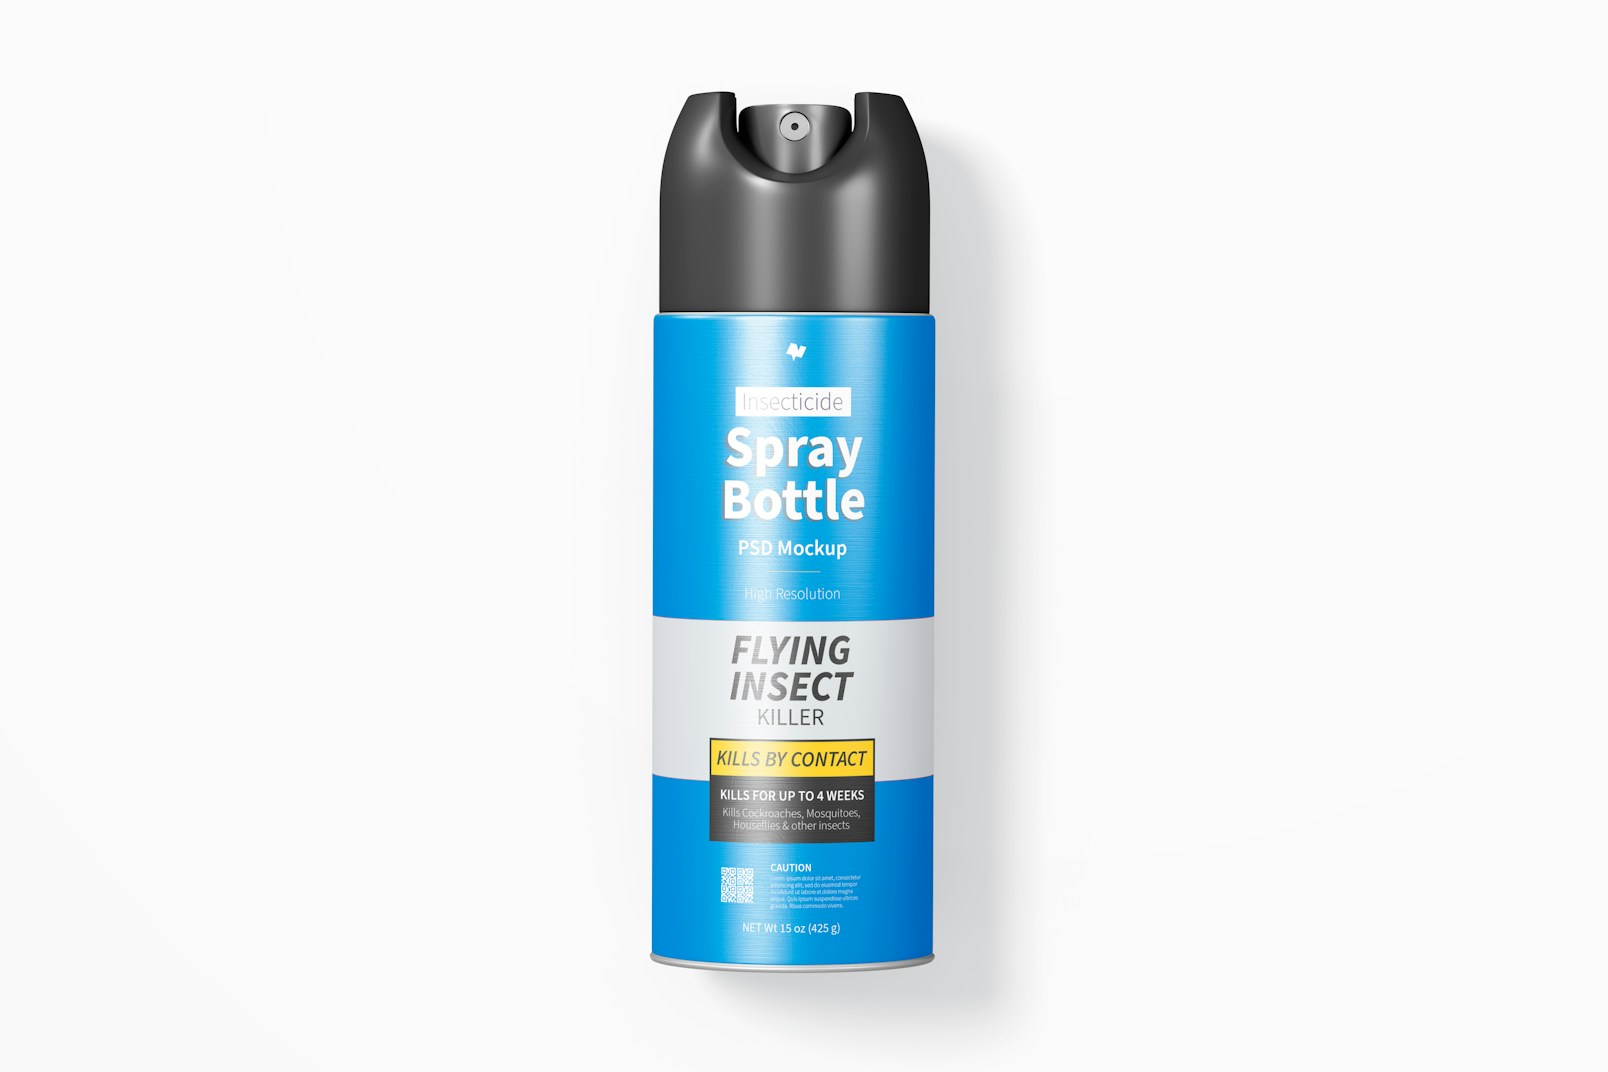 Insecticide Spray Bottle Mockup, Top View